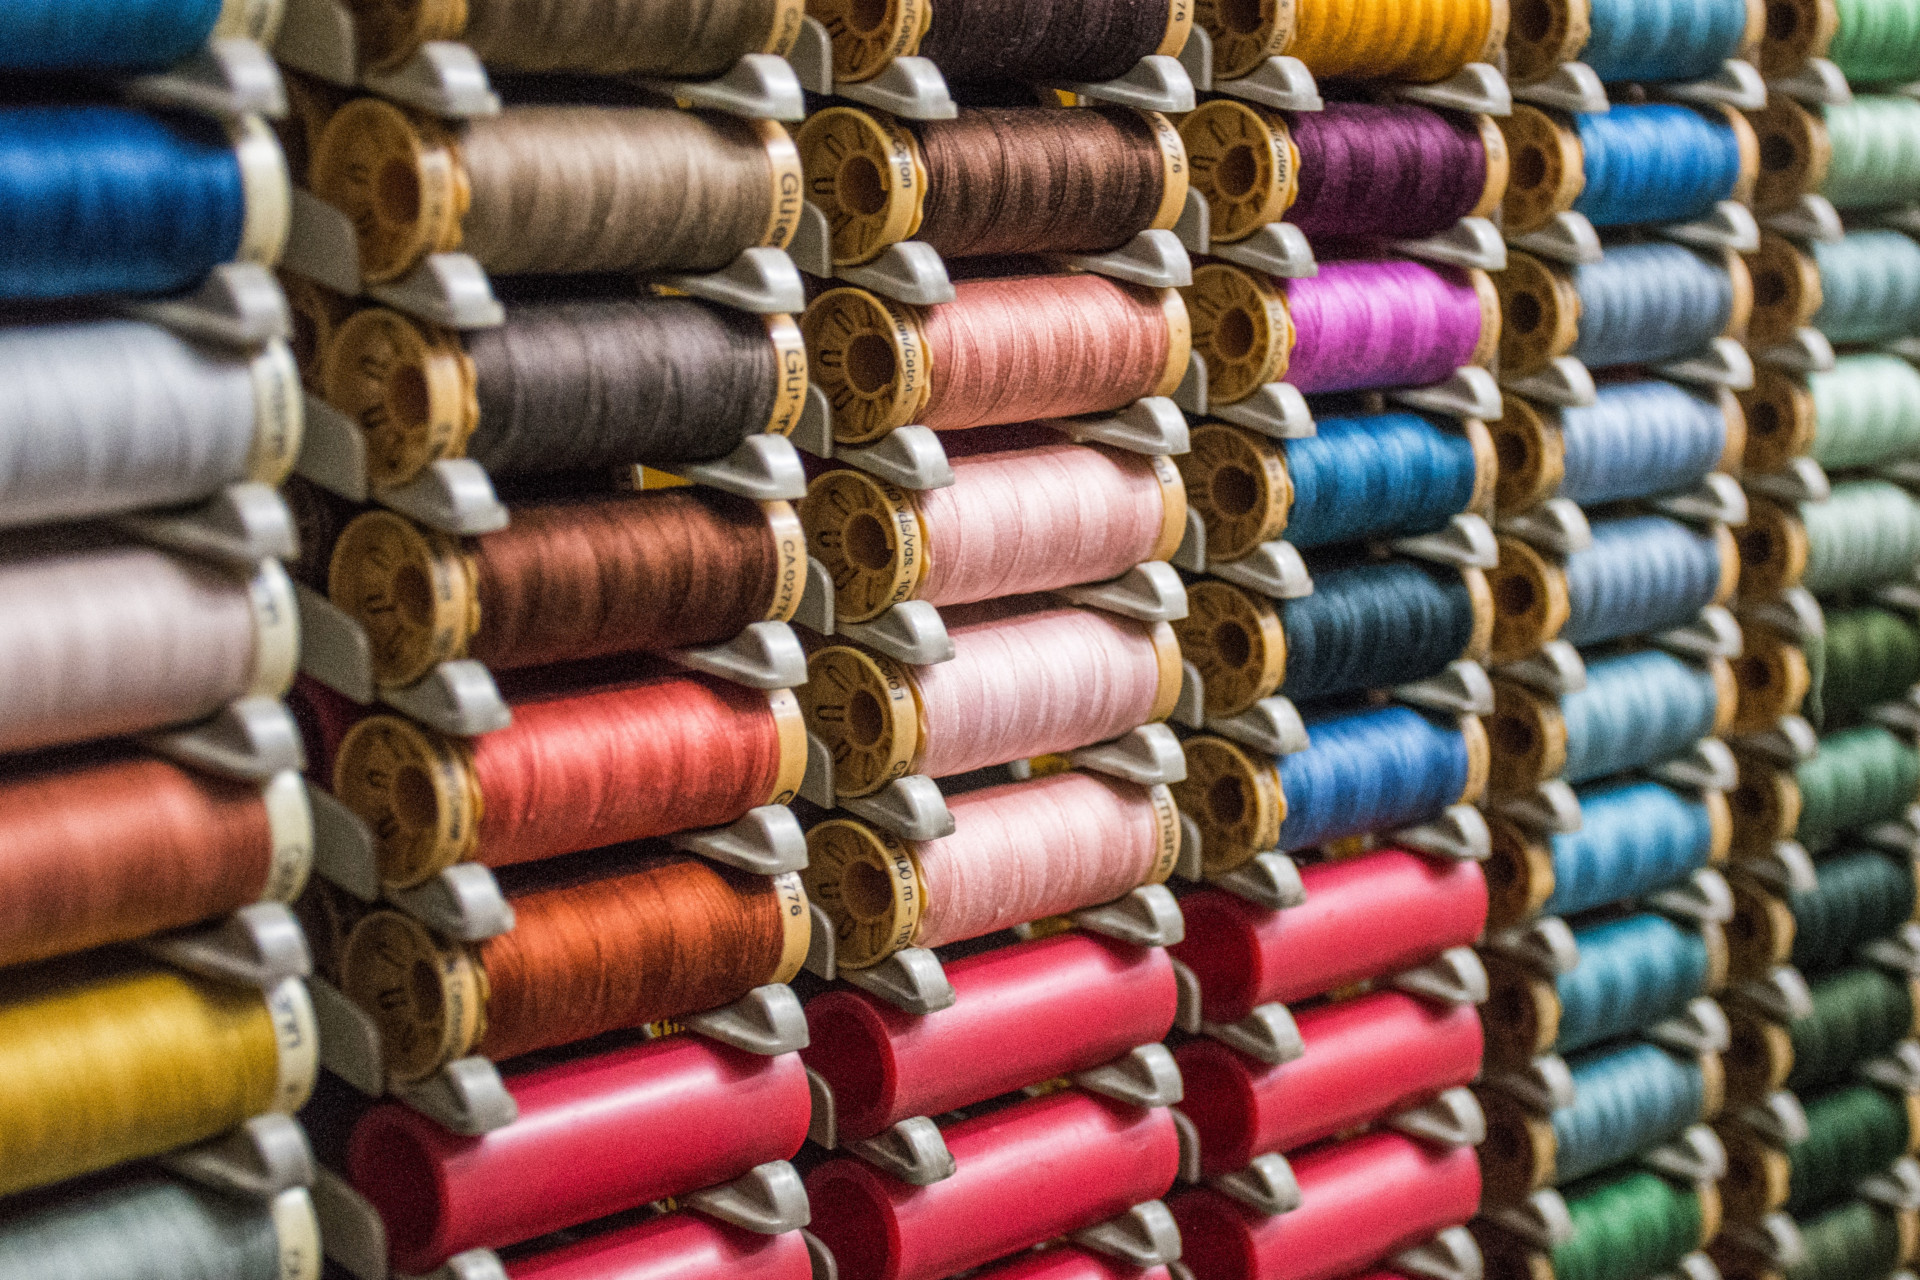 Colourful spools of thread stacked up on shelves